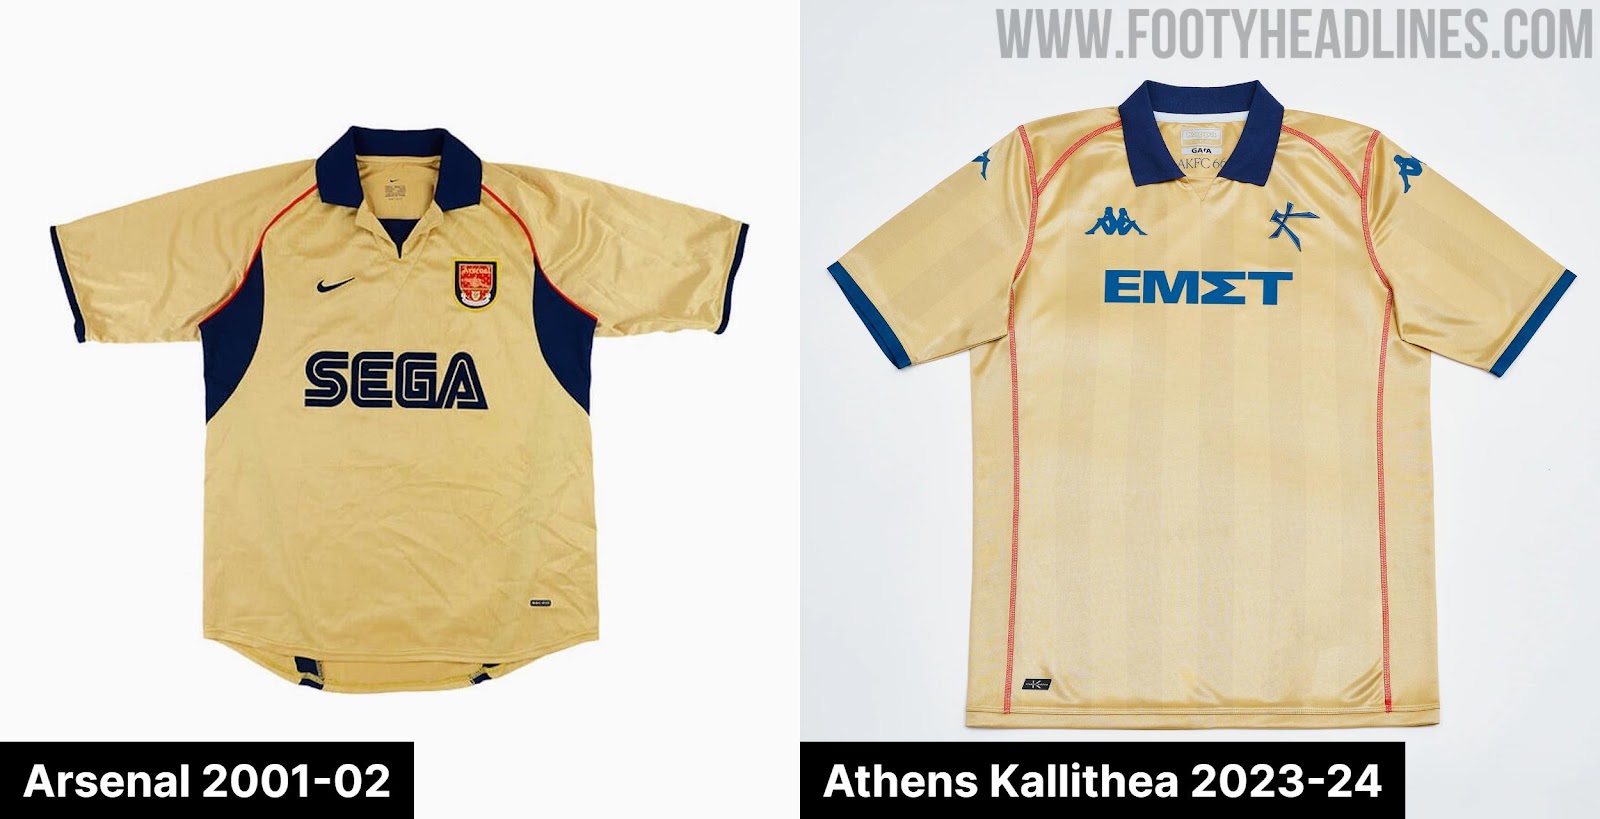 Athens Kallithea Announce Early Access To 23/24 Home & Away Shirts